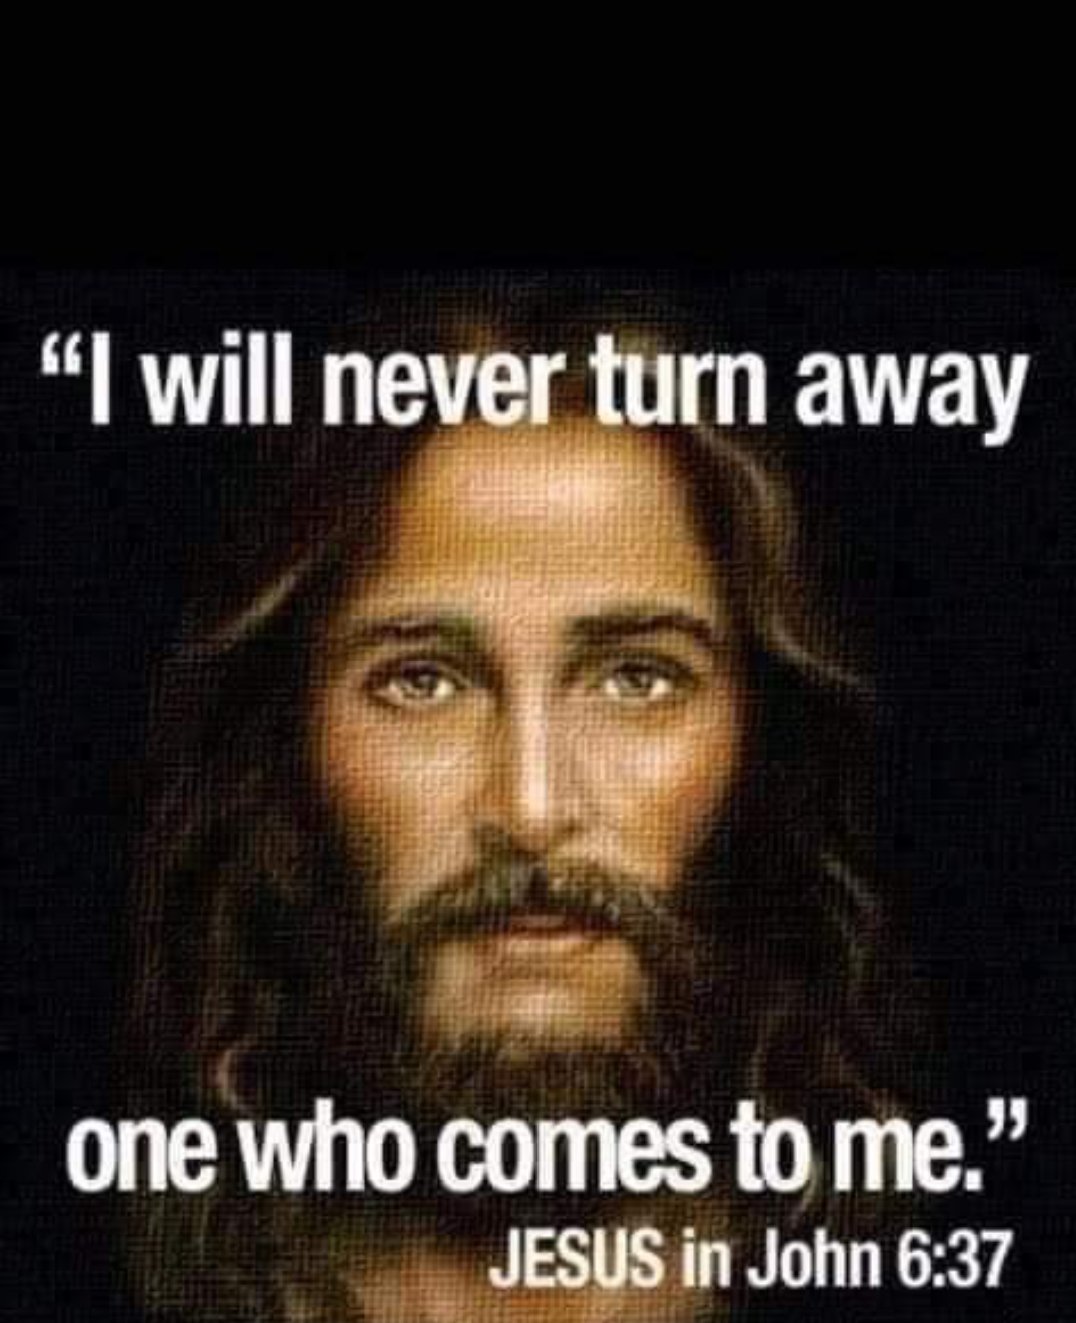 "I will never turn away JJ one who comes to me:' JESUS in John 6.37